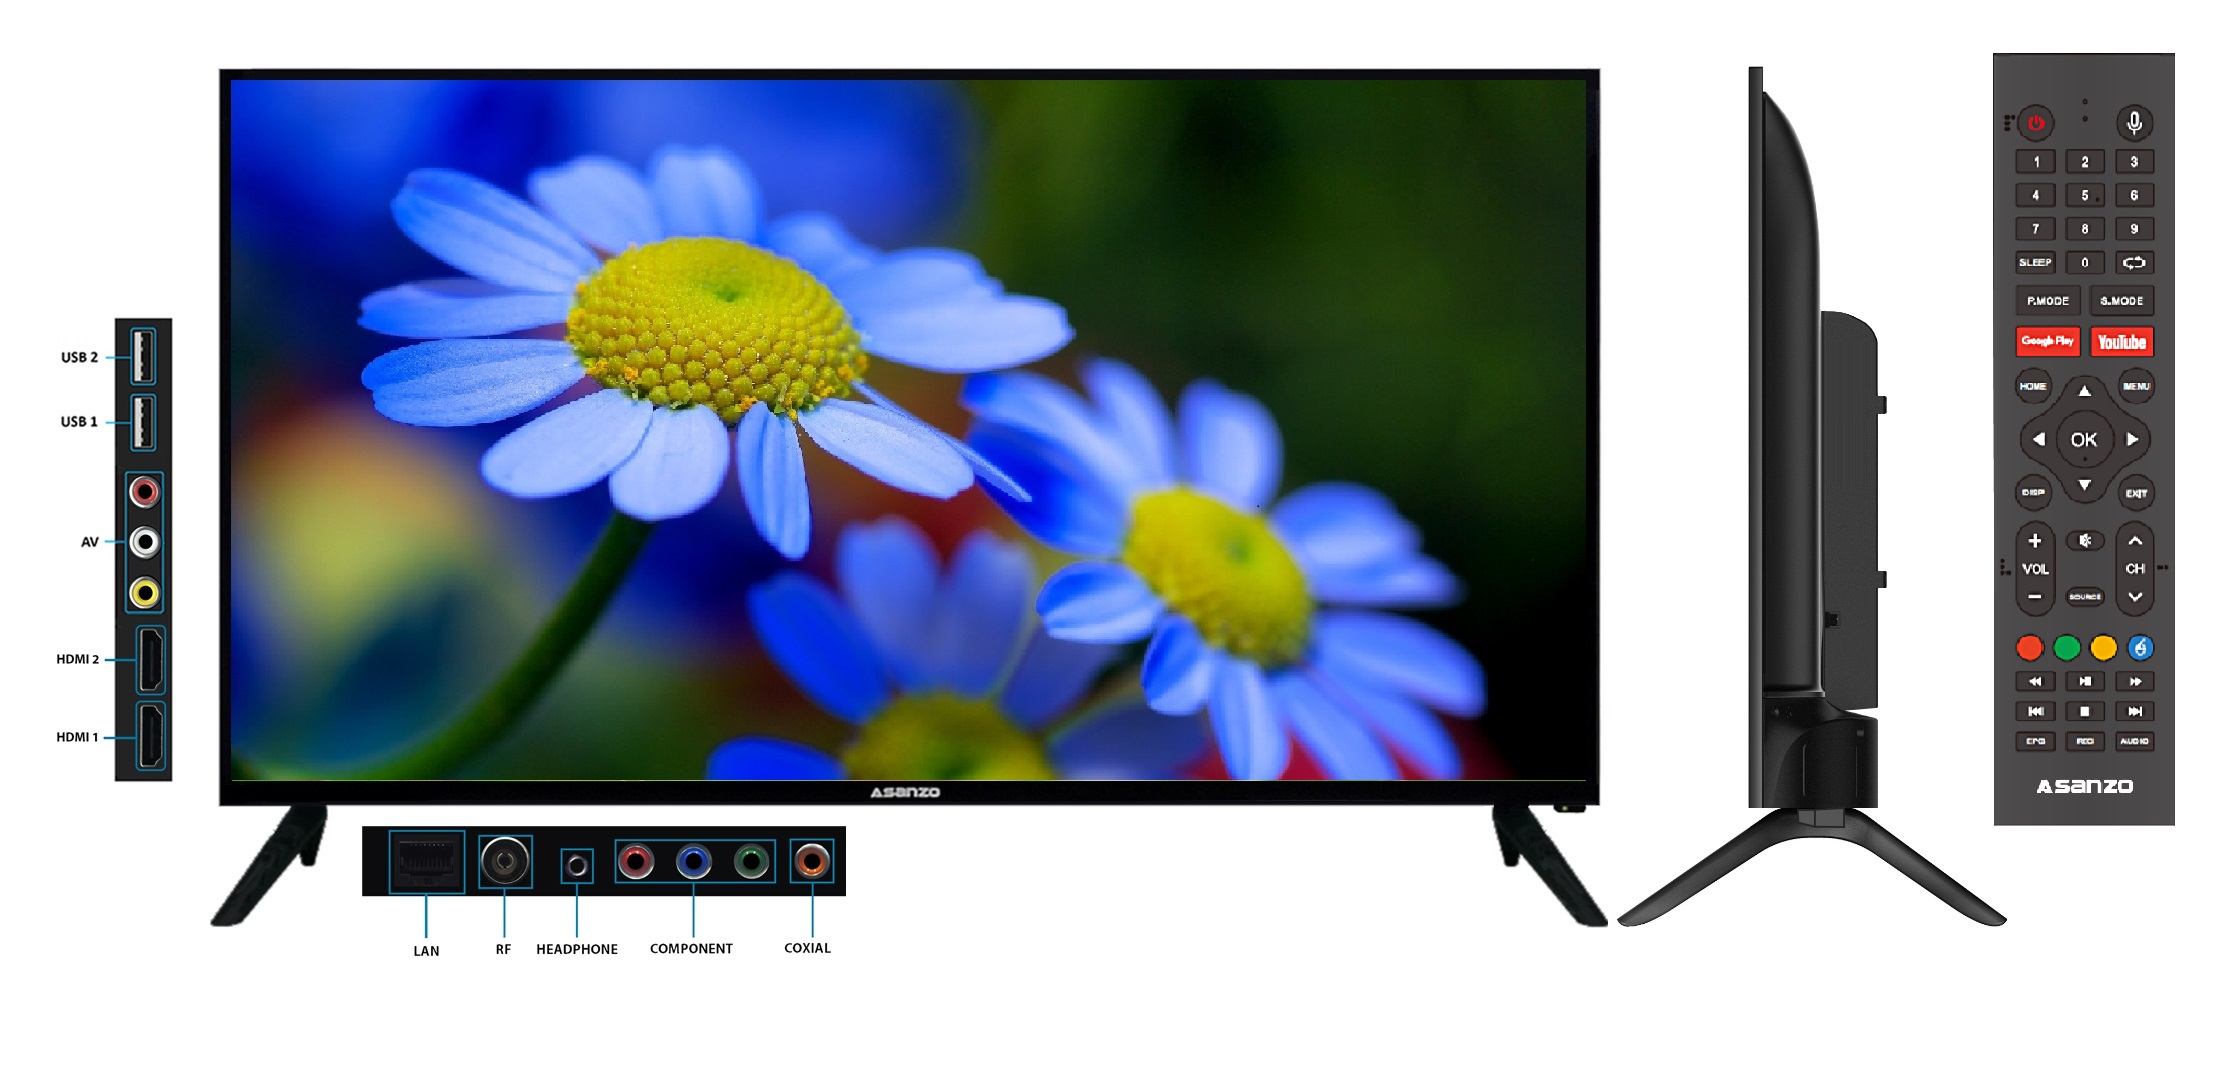 Smart TV iSLIM 32”- 32S52 (Android 9.0)